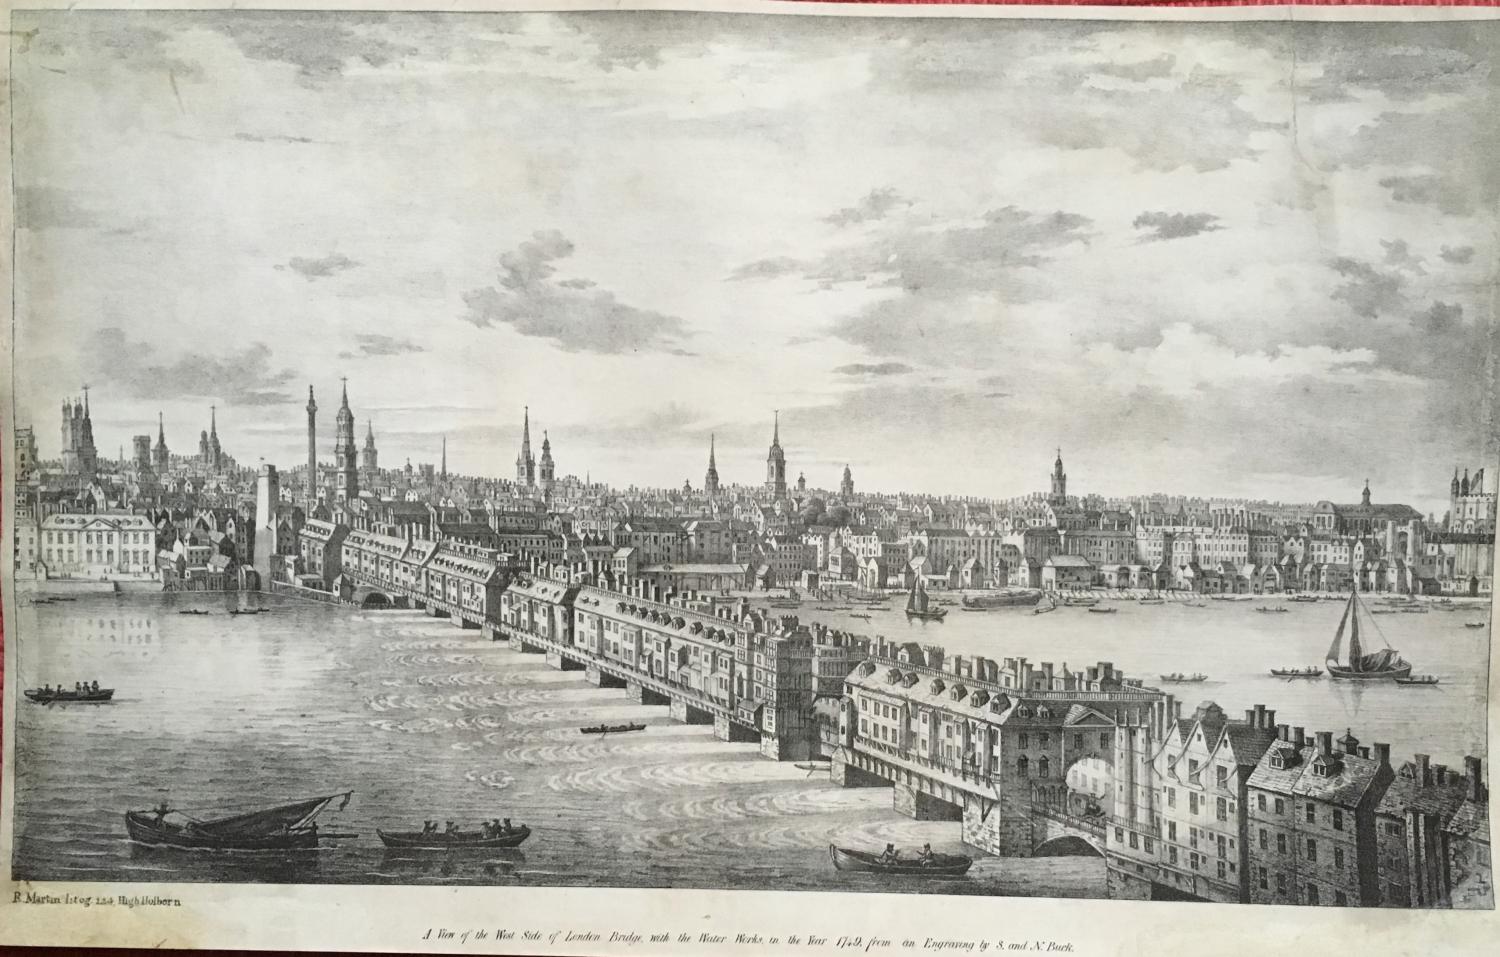 Martin -A View of the West Side London Bridge